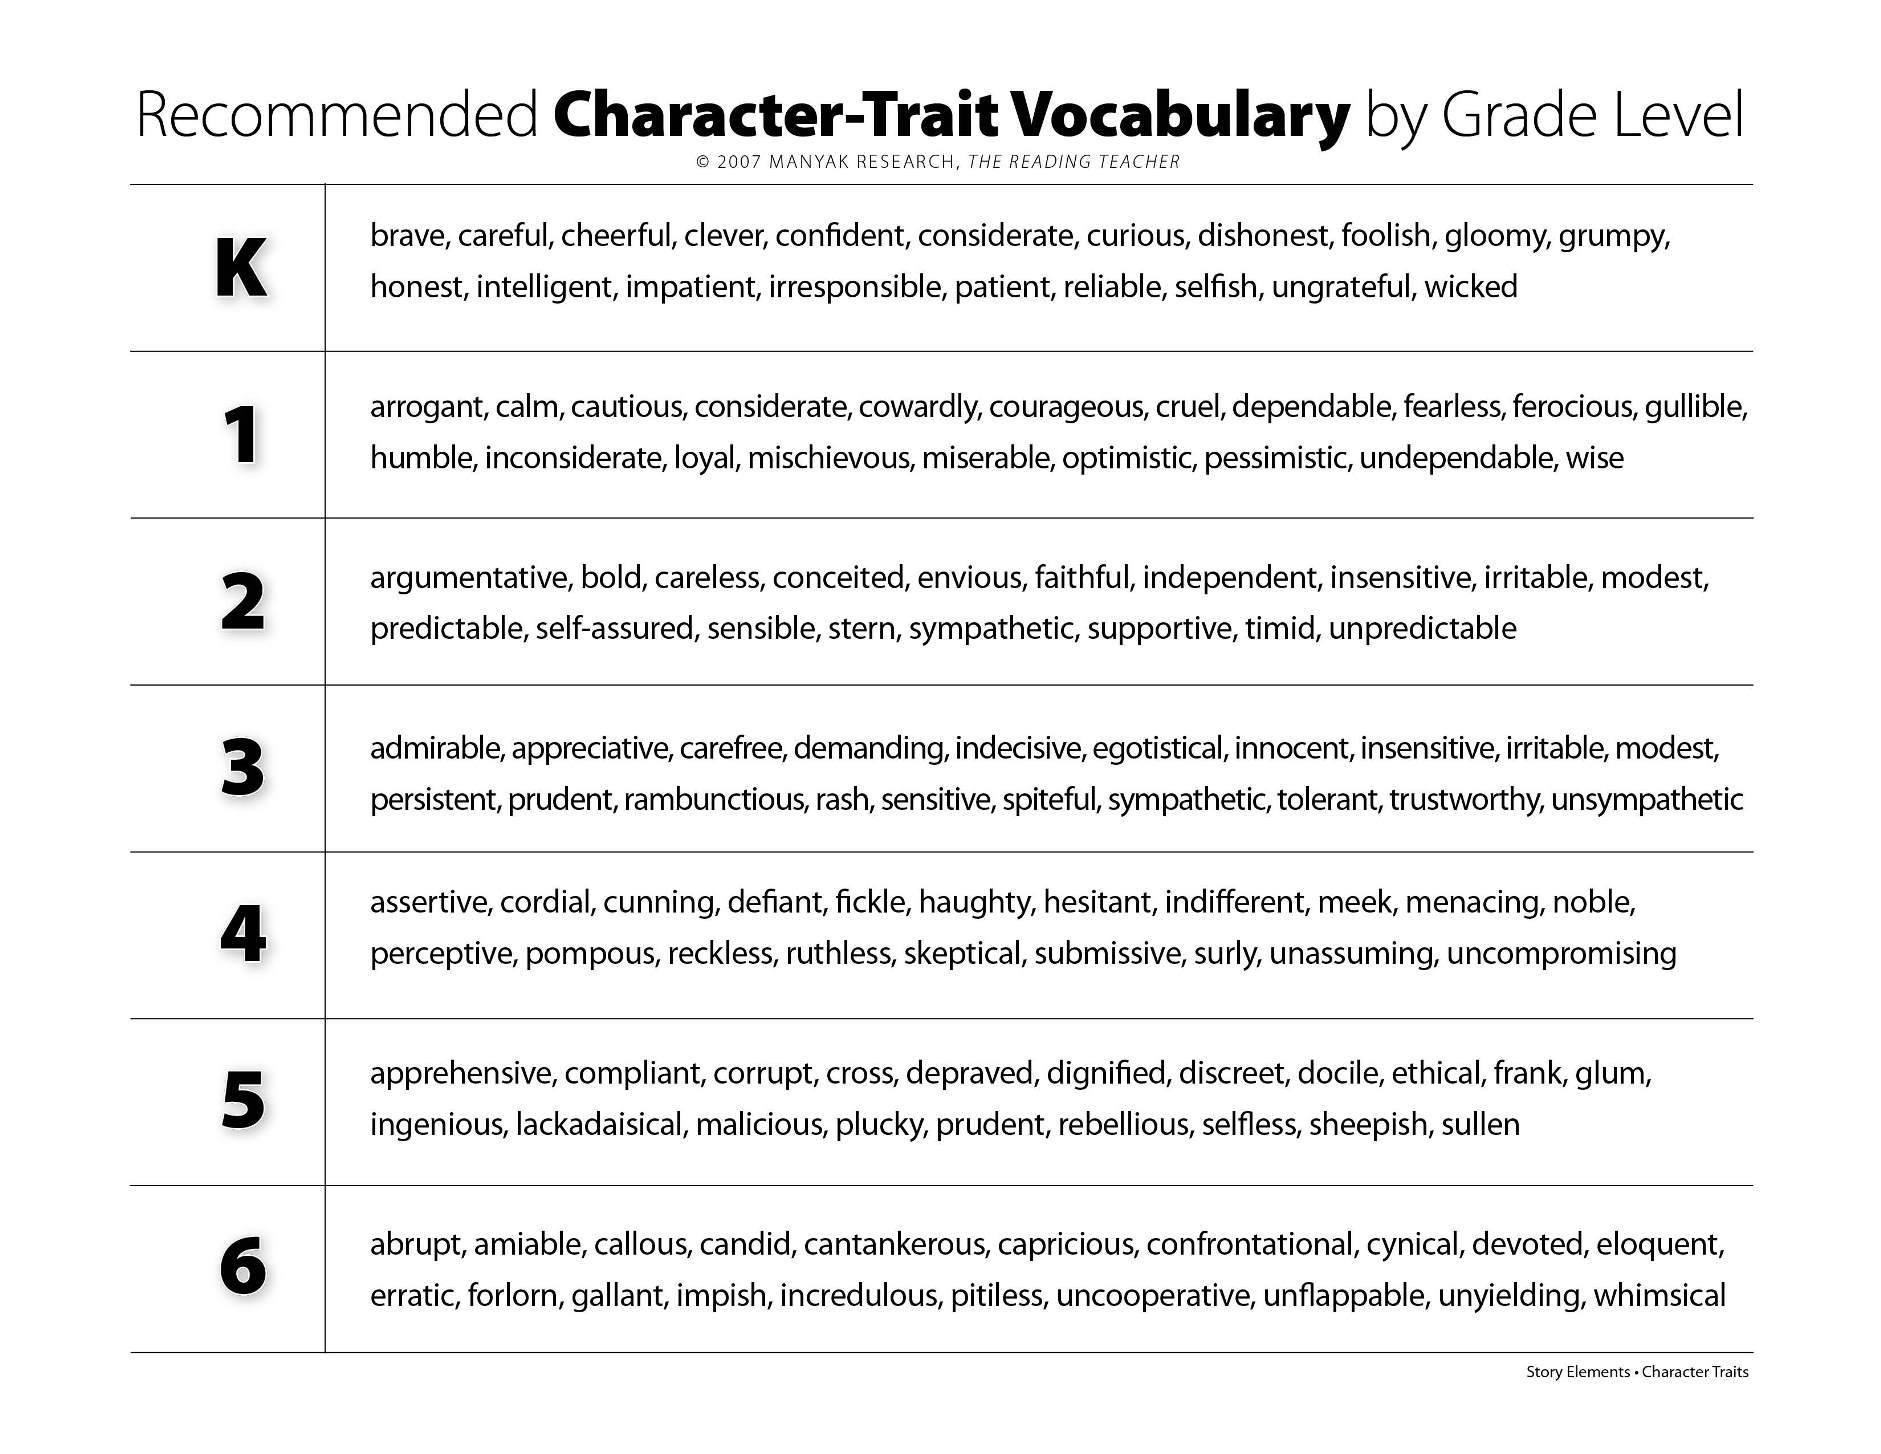 Character Traits by Grade Level - Downloadable Resource